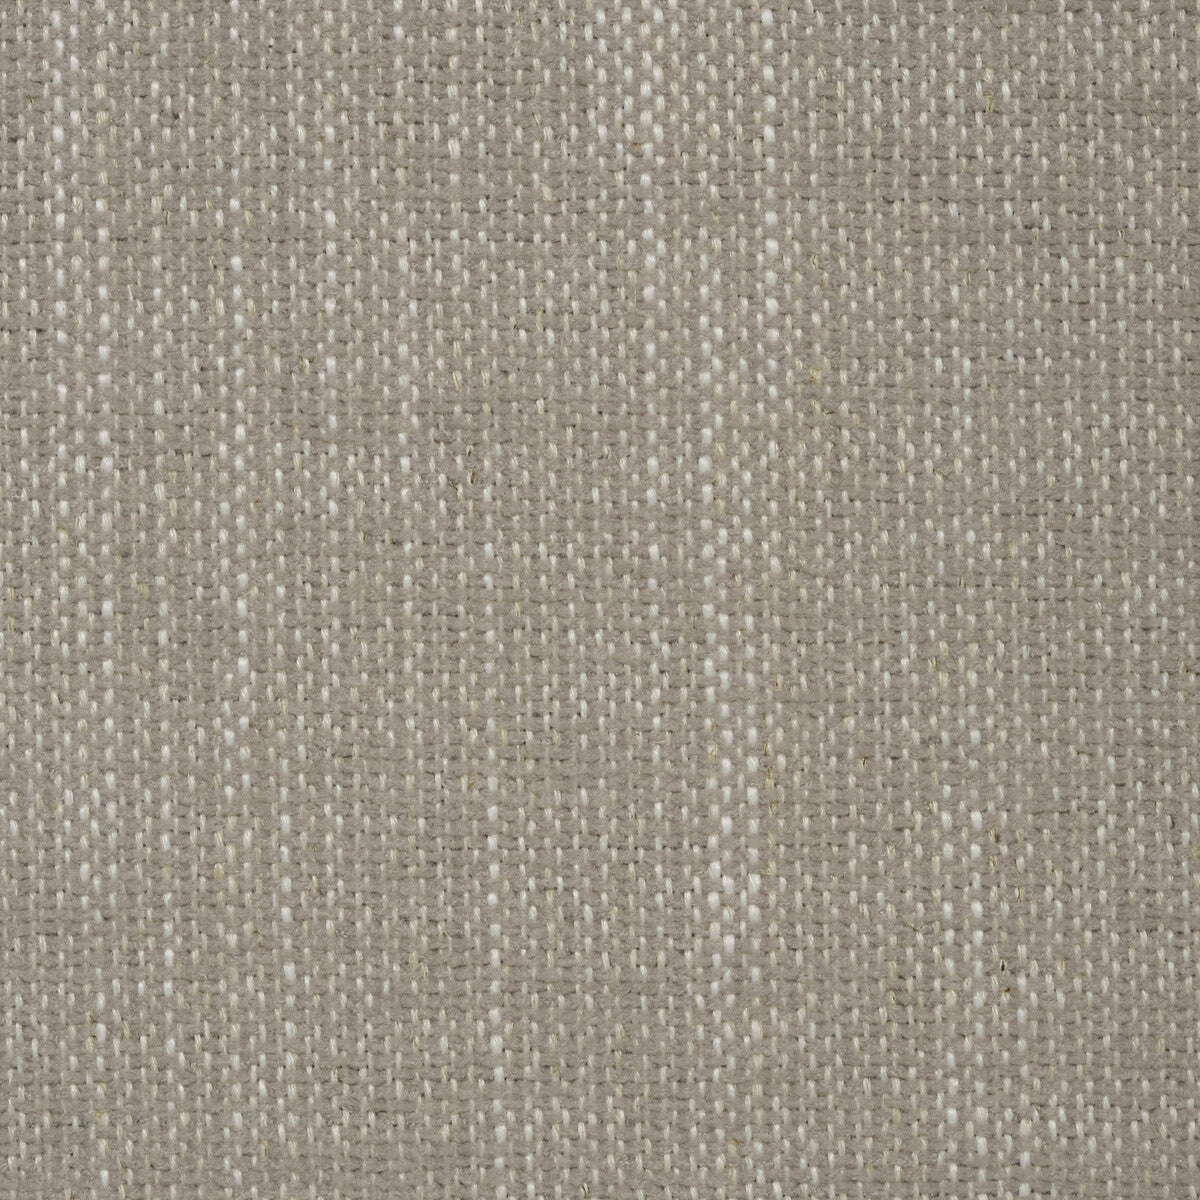 Kravet Smart fabric in 35111-1610 color - pattern 35111.1610.0 - by Kravet Smart in the Performance Crypton Home collection